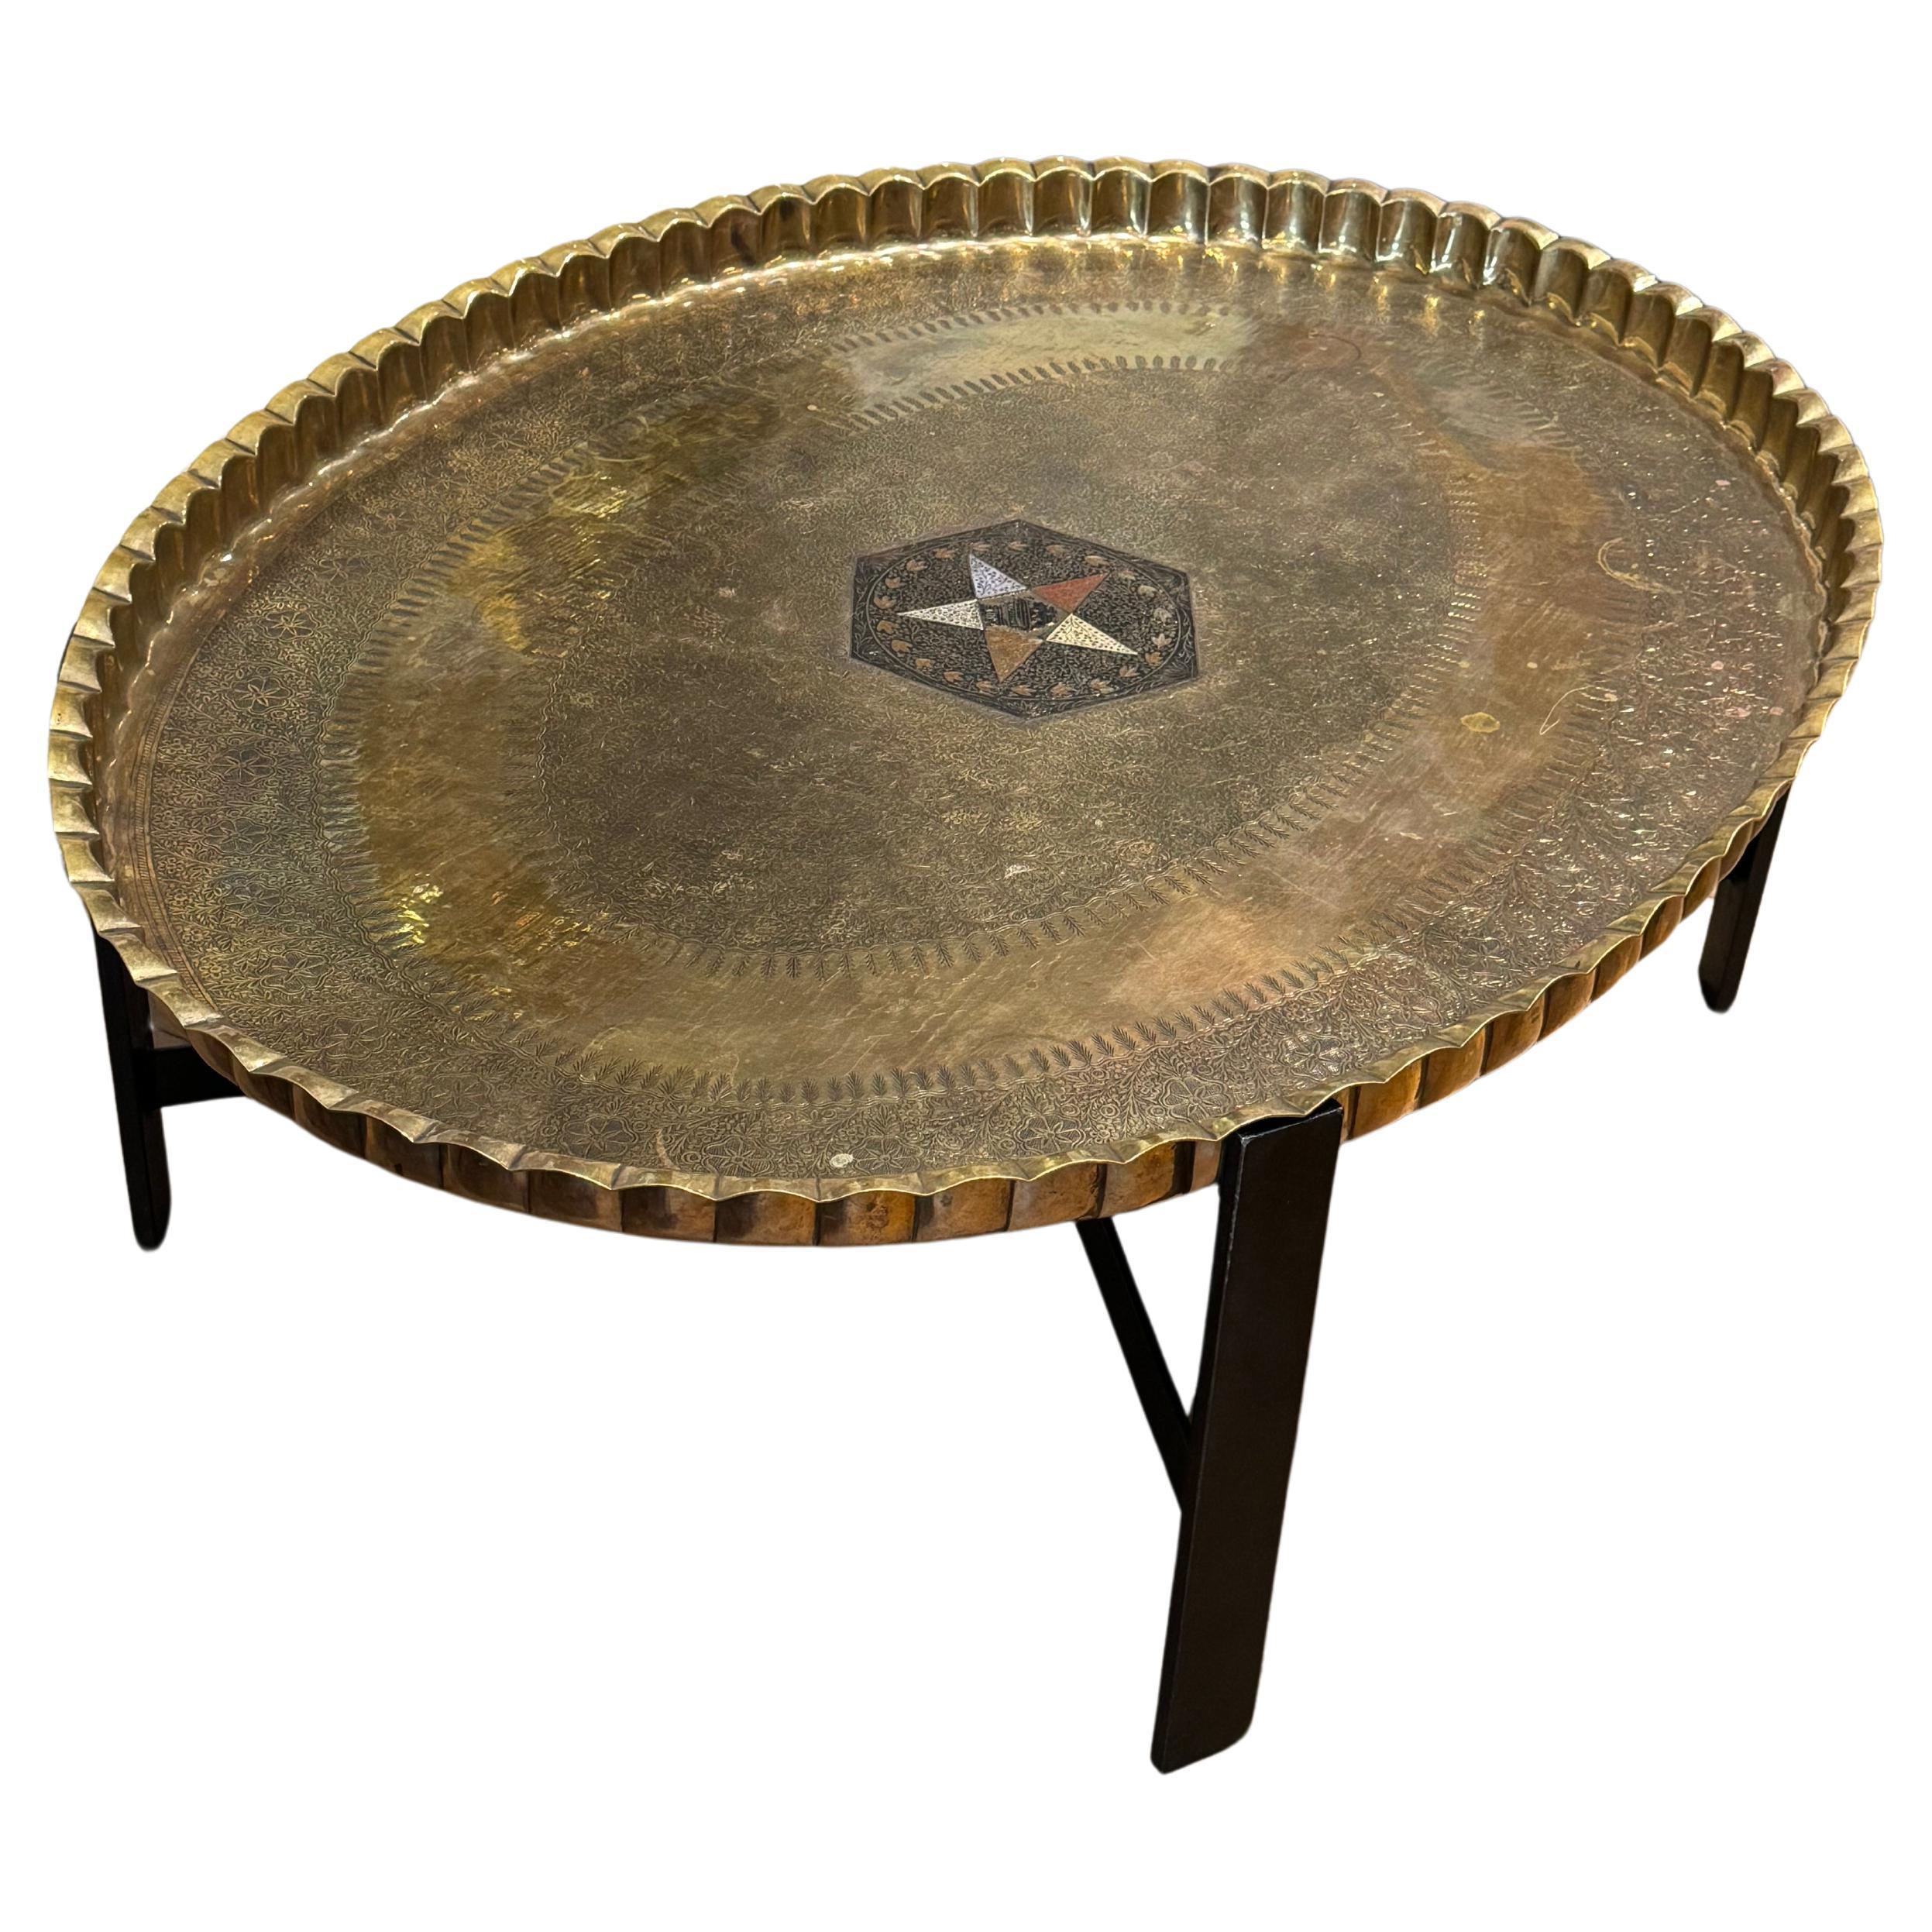 Repoussé Moroccan Hand Texted Brass Coffee Table, Circa 1930  For Sale